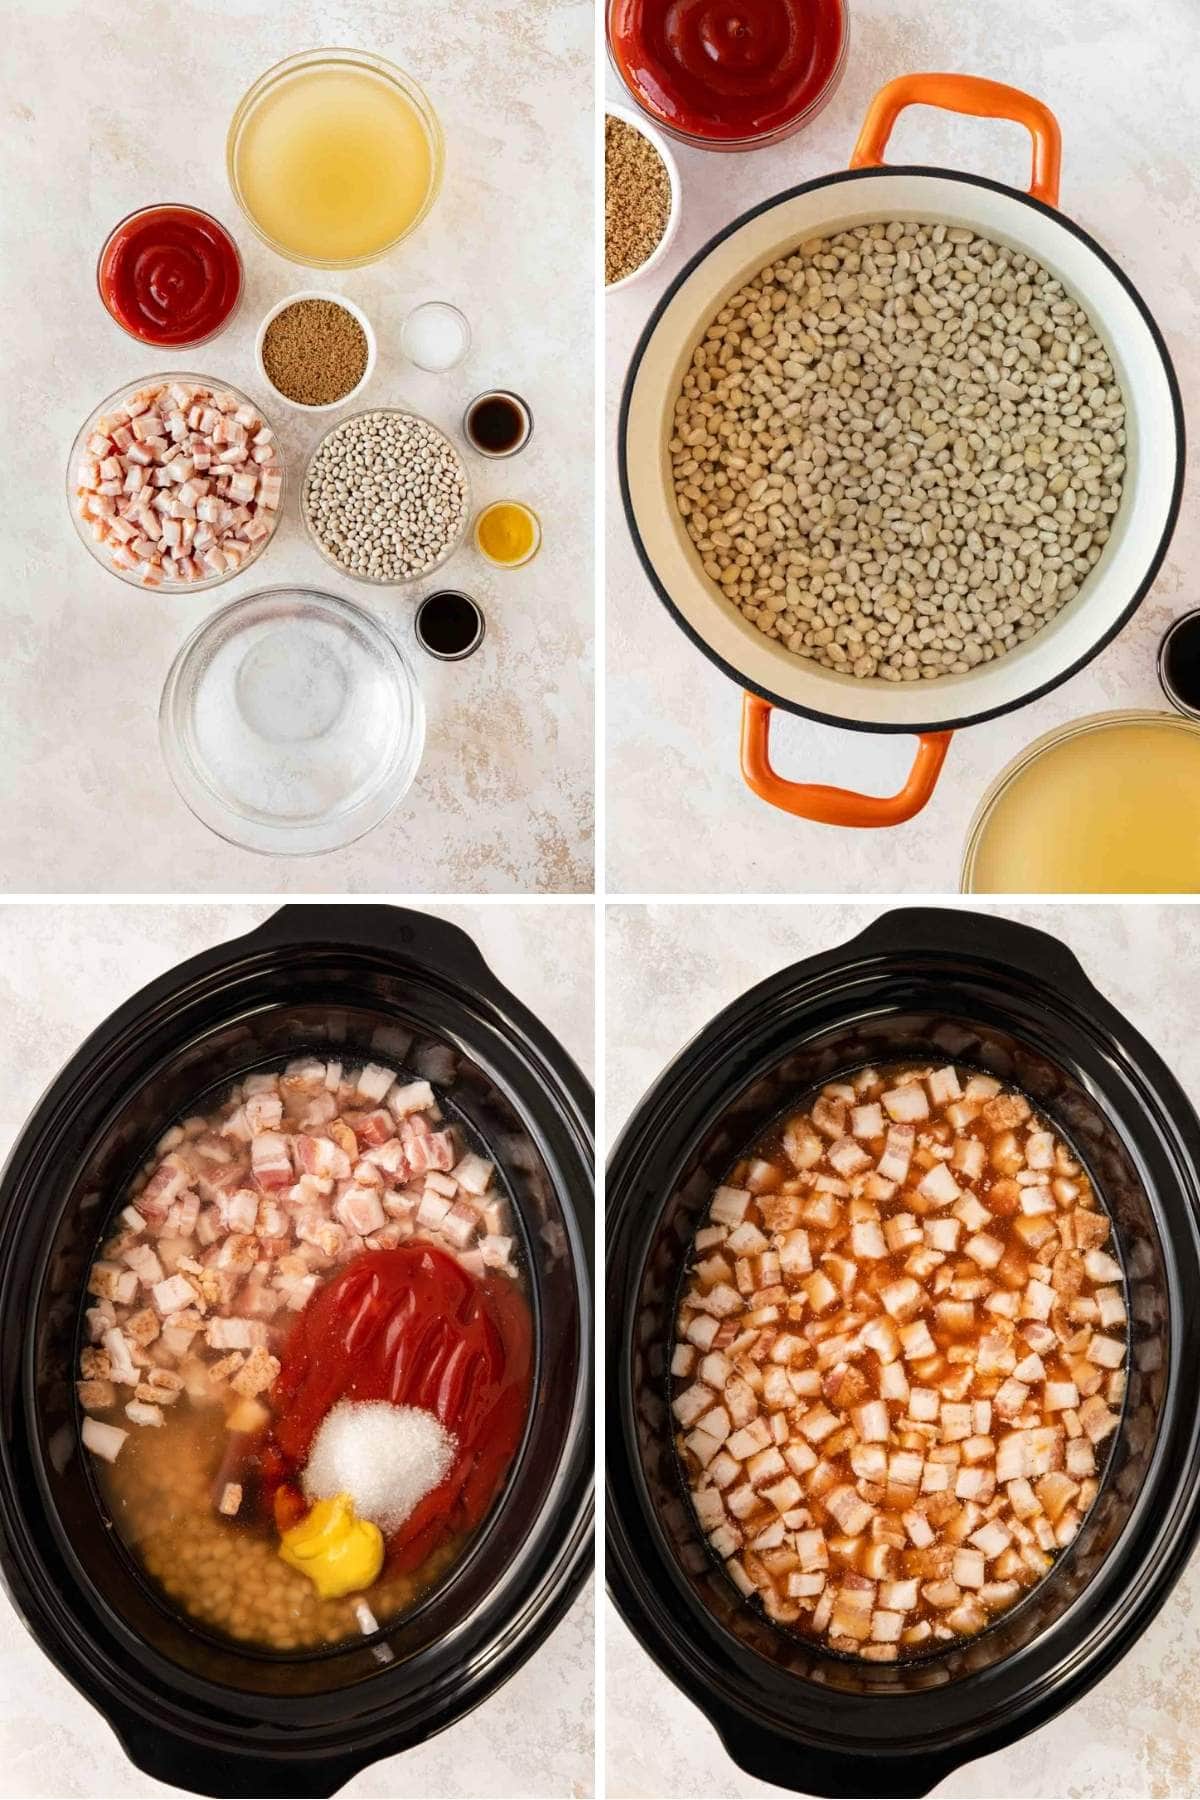 Slow Cooker Pork and Beans collage